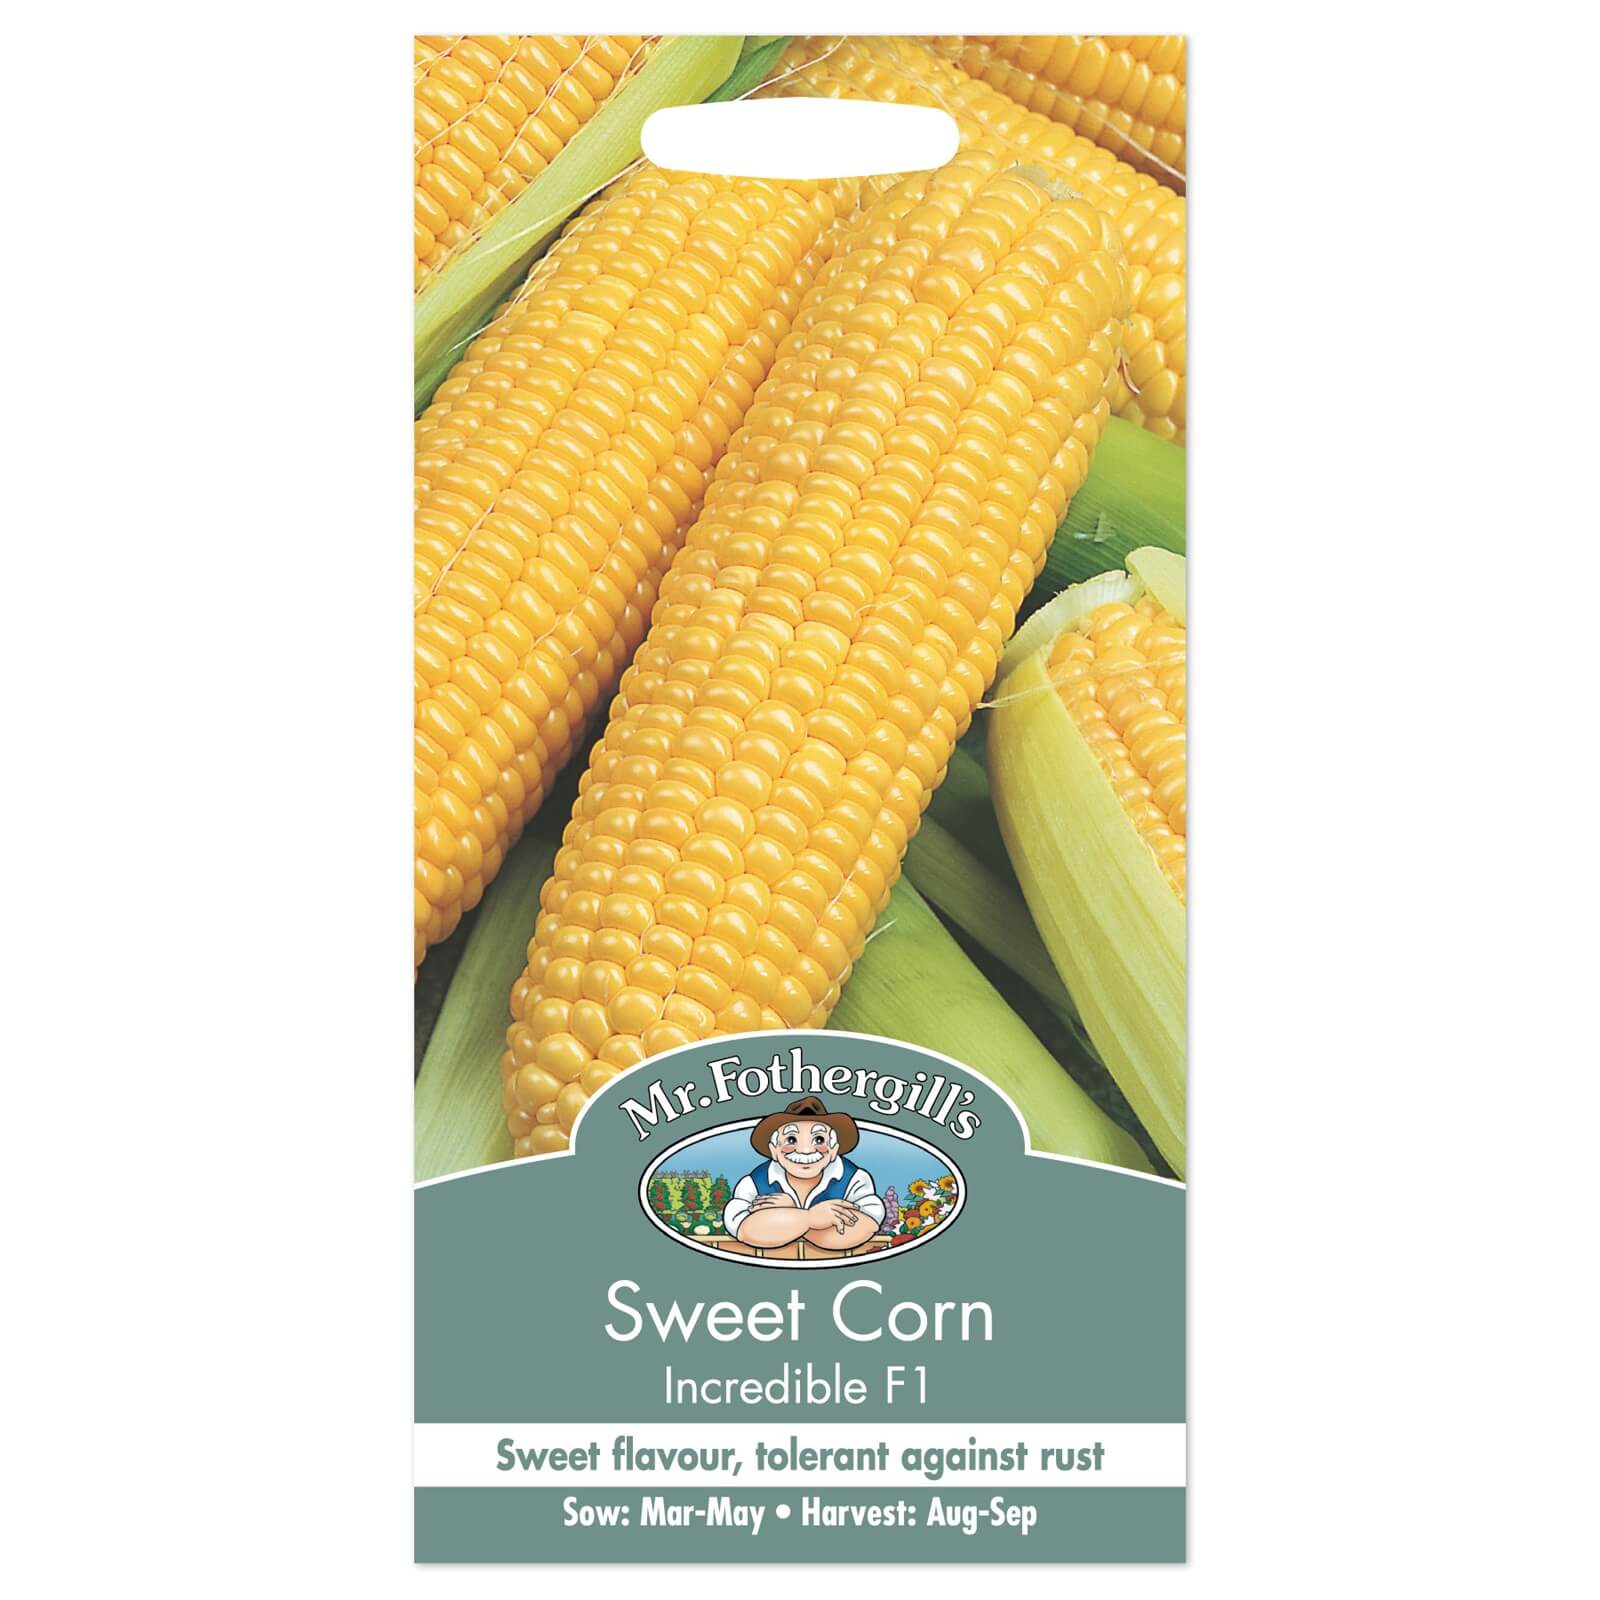 Mr. Fothergill's Sweet Corn Incredible F1 Seeds